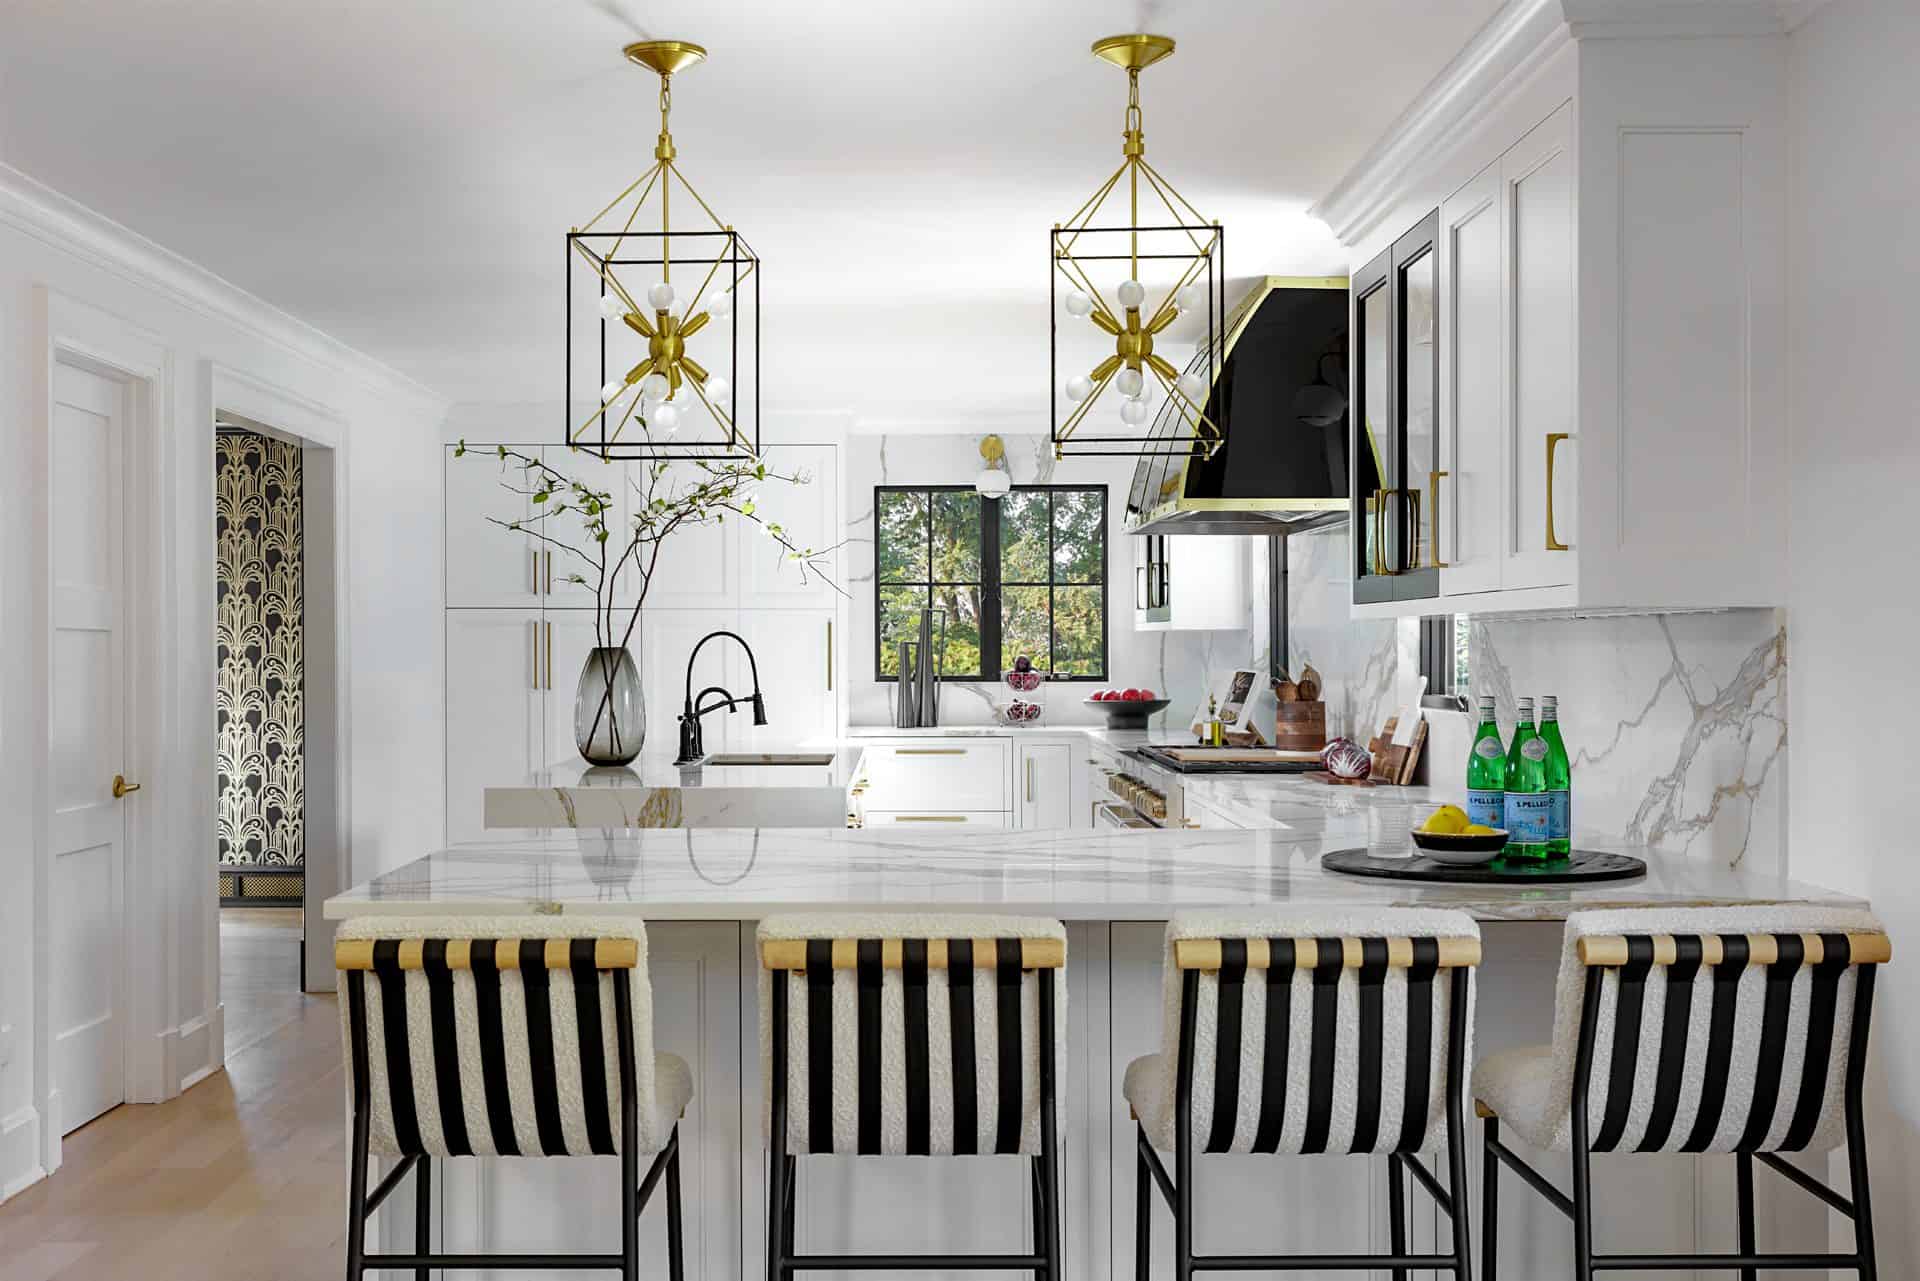 Expansive view of kitchen with four black and white stools in the foreground and geometric pendant lights above peninsula with gold accents